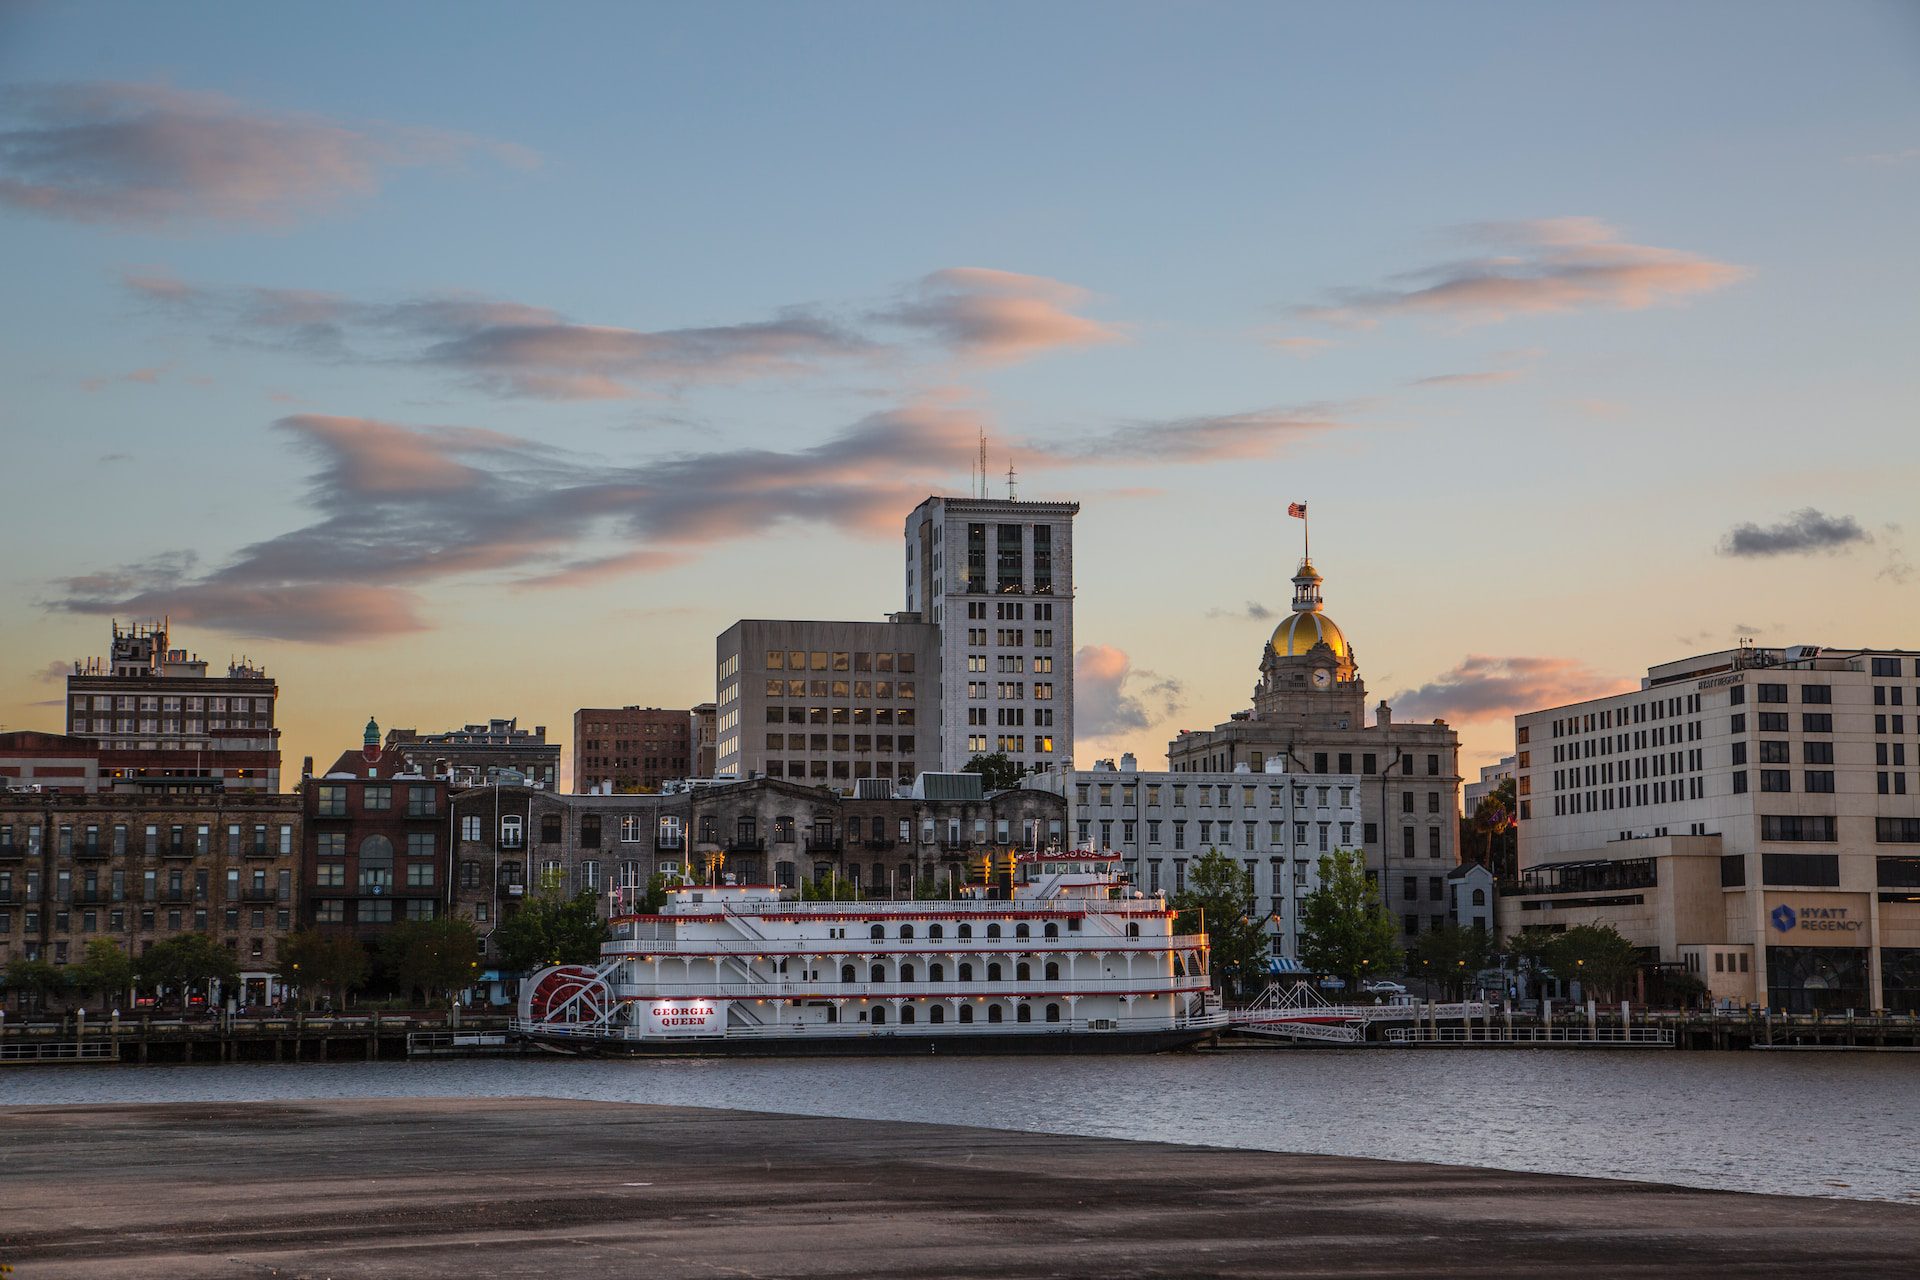 View of the Savannah River with a riverboat cruise boat docked on River Street.